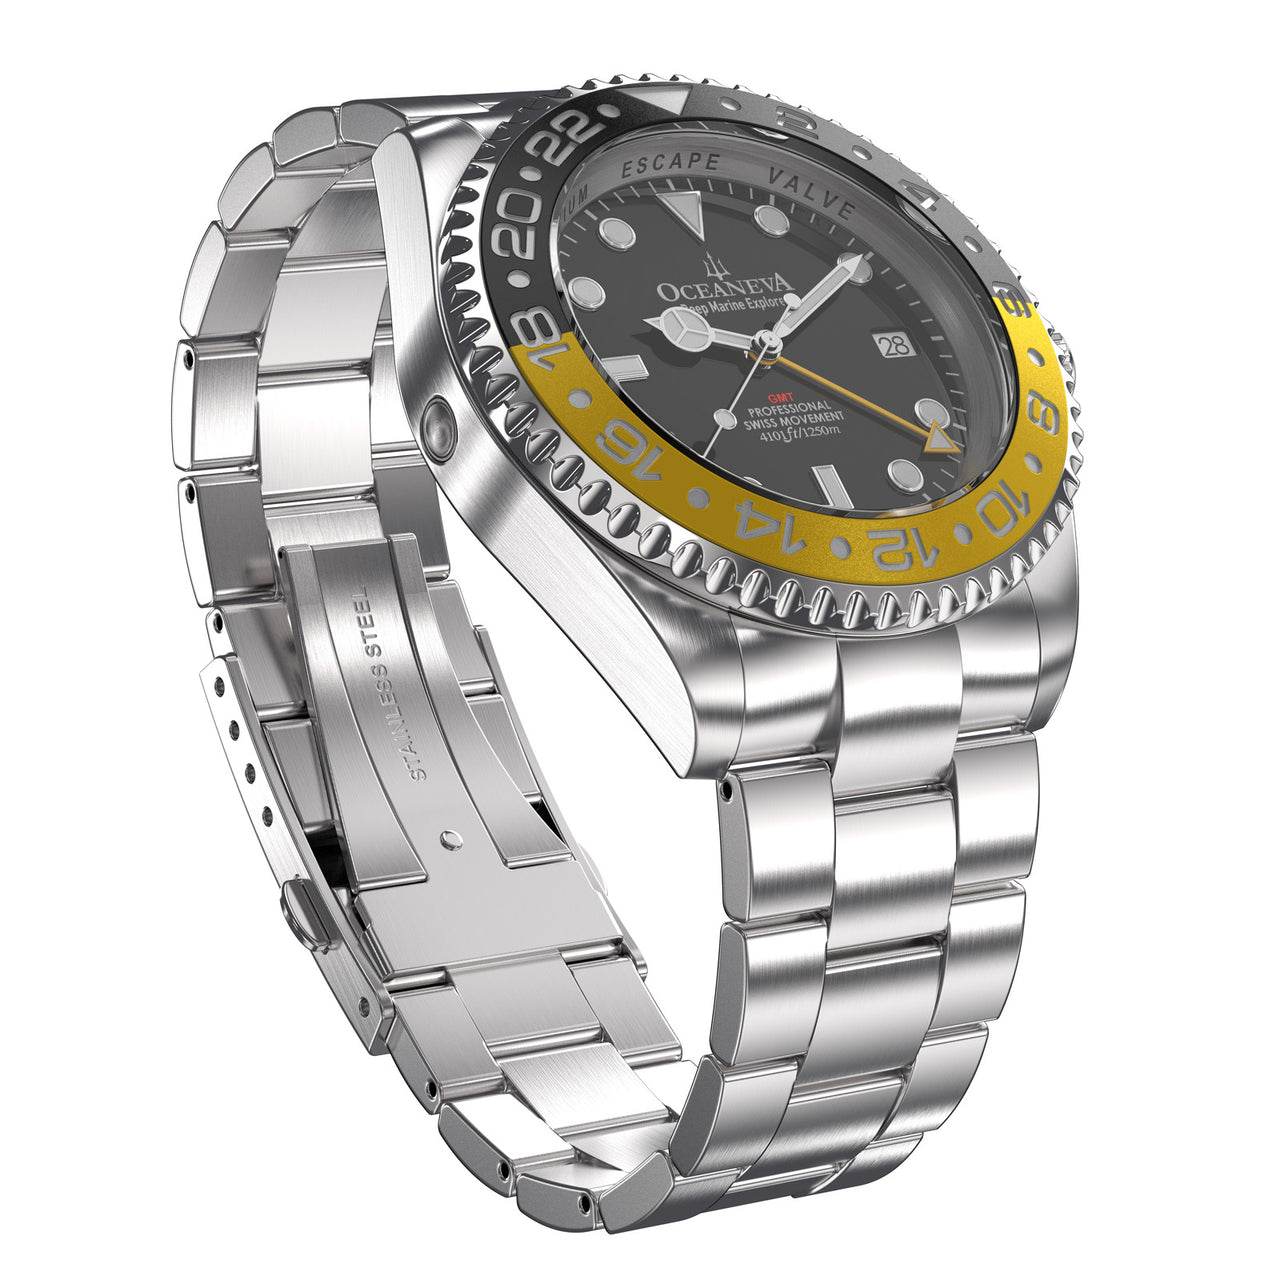 Oceaneva 1250M GMT Dive Watch Black And Yellow Front Picture Slight Right Slant View